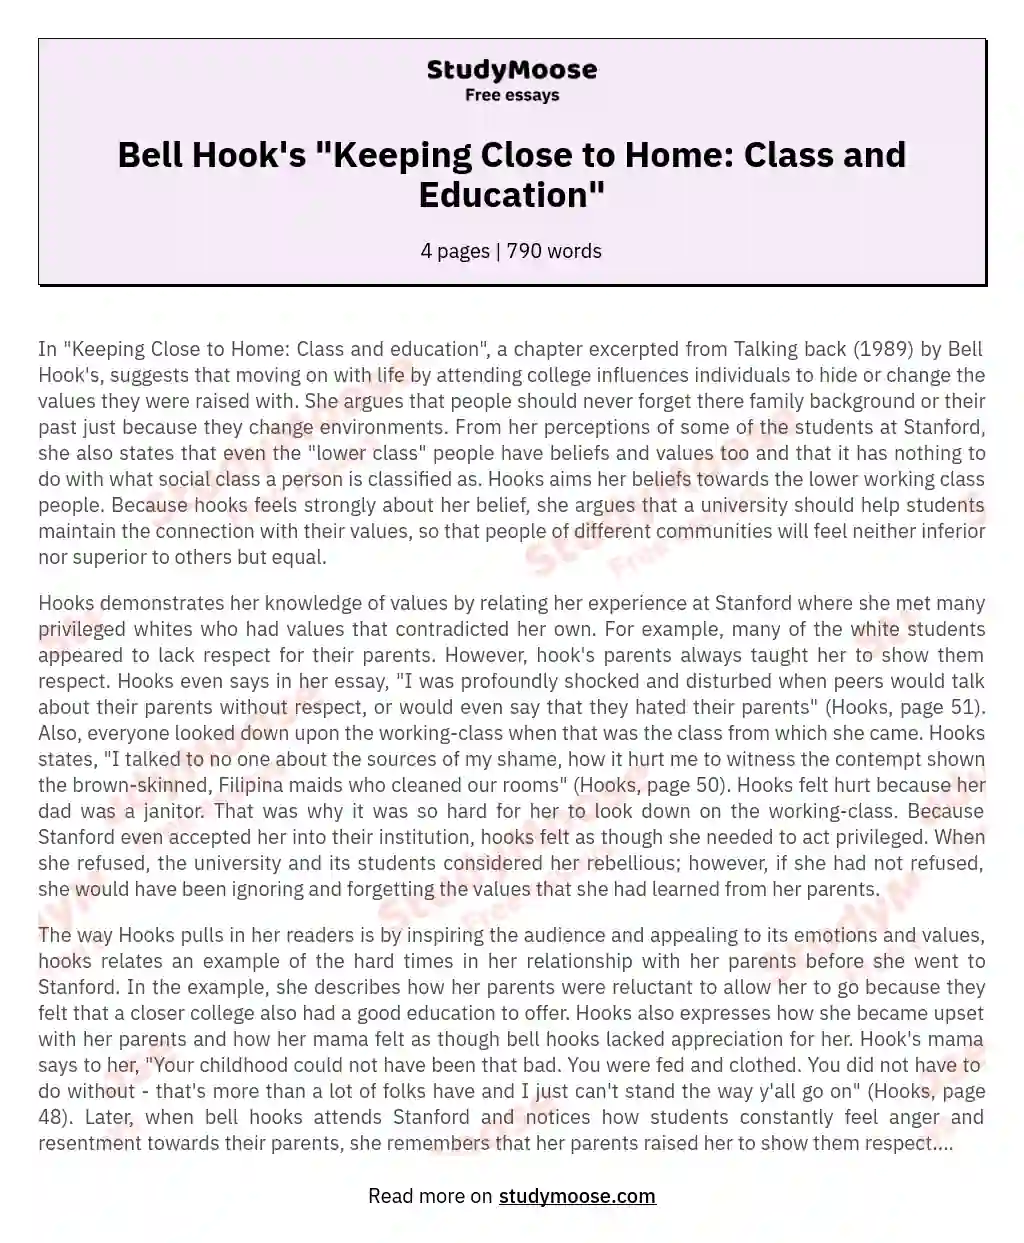 Bell Hook's "Keeping Close to Home: Class and Education" essay